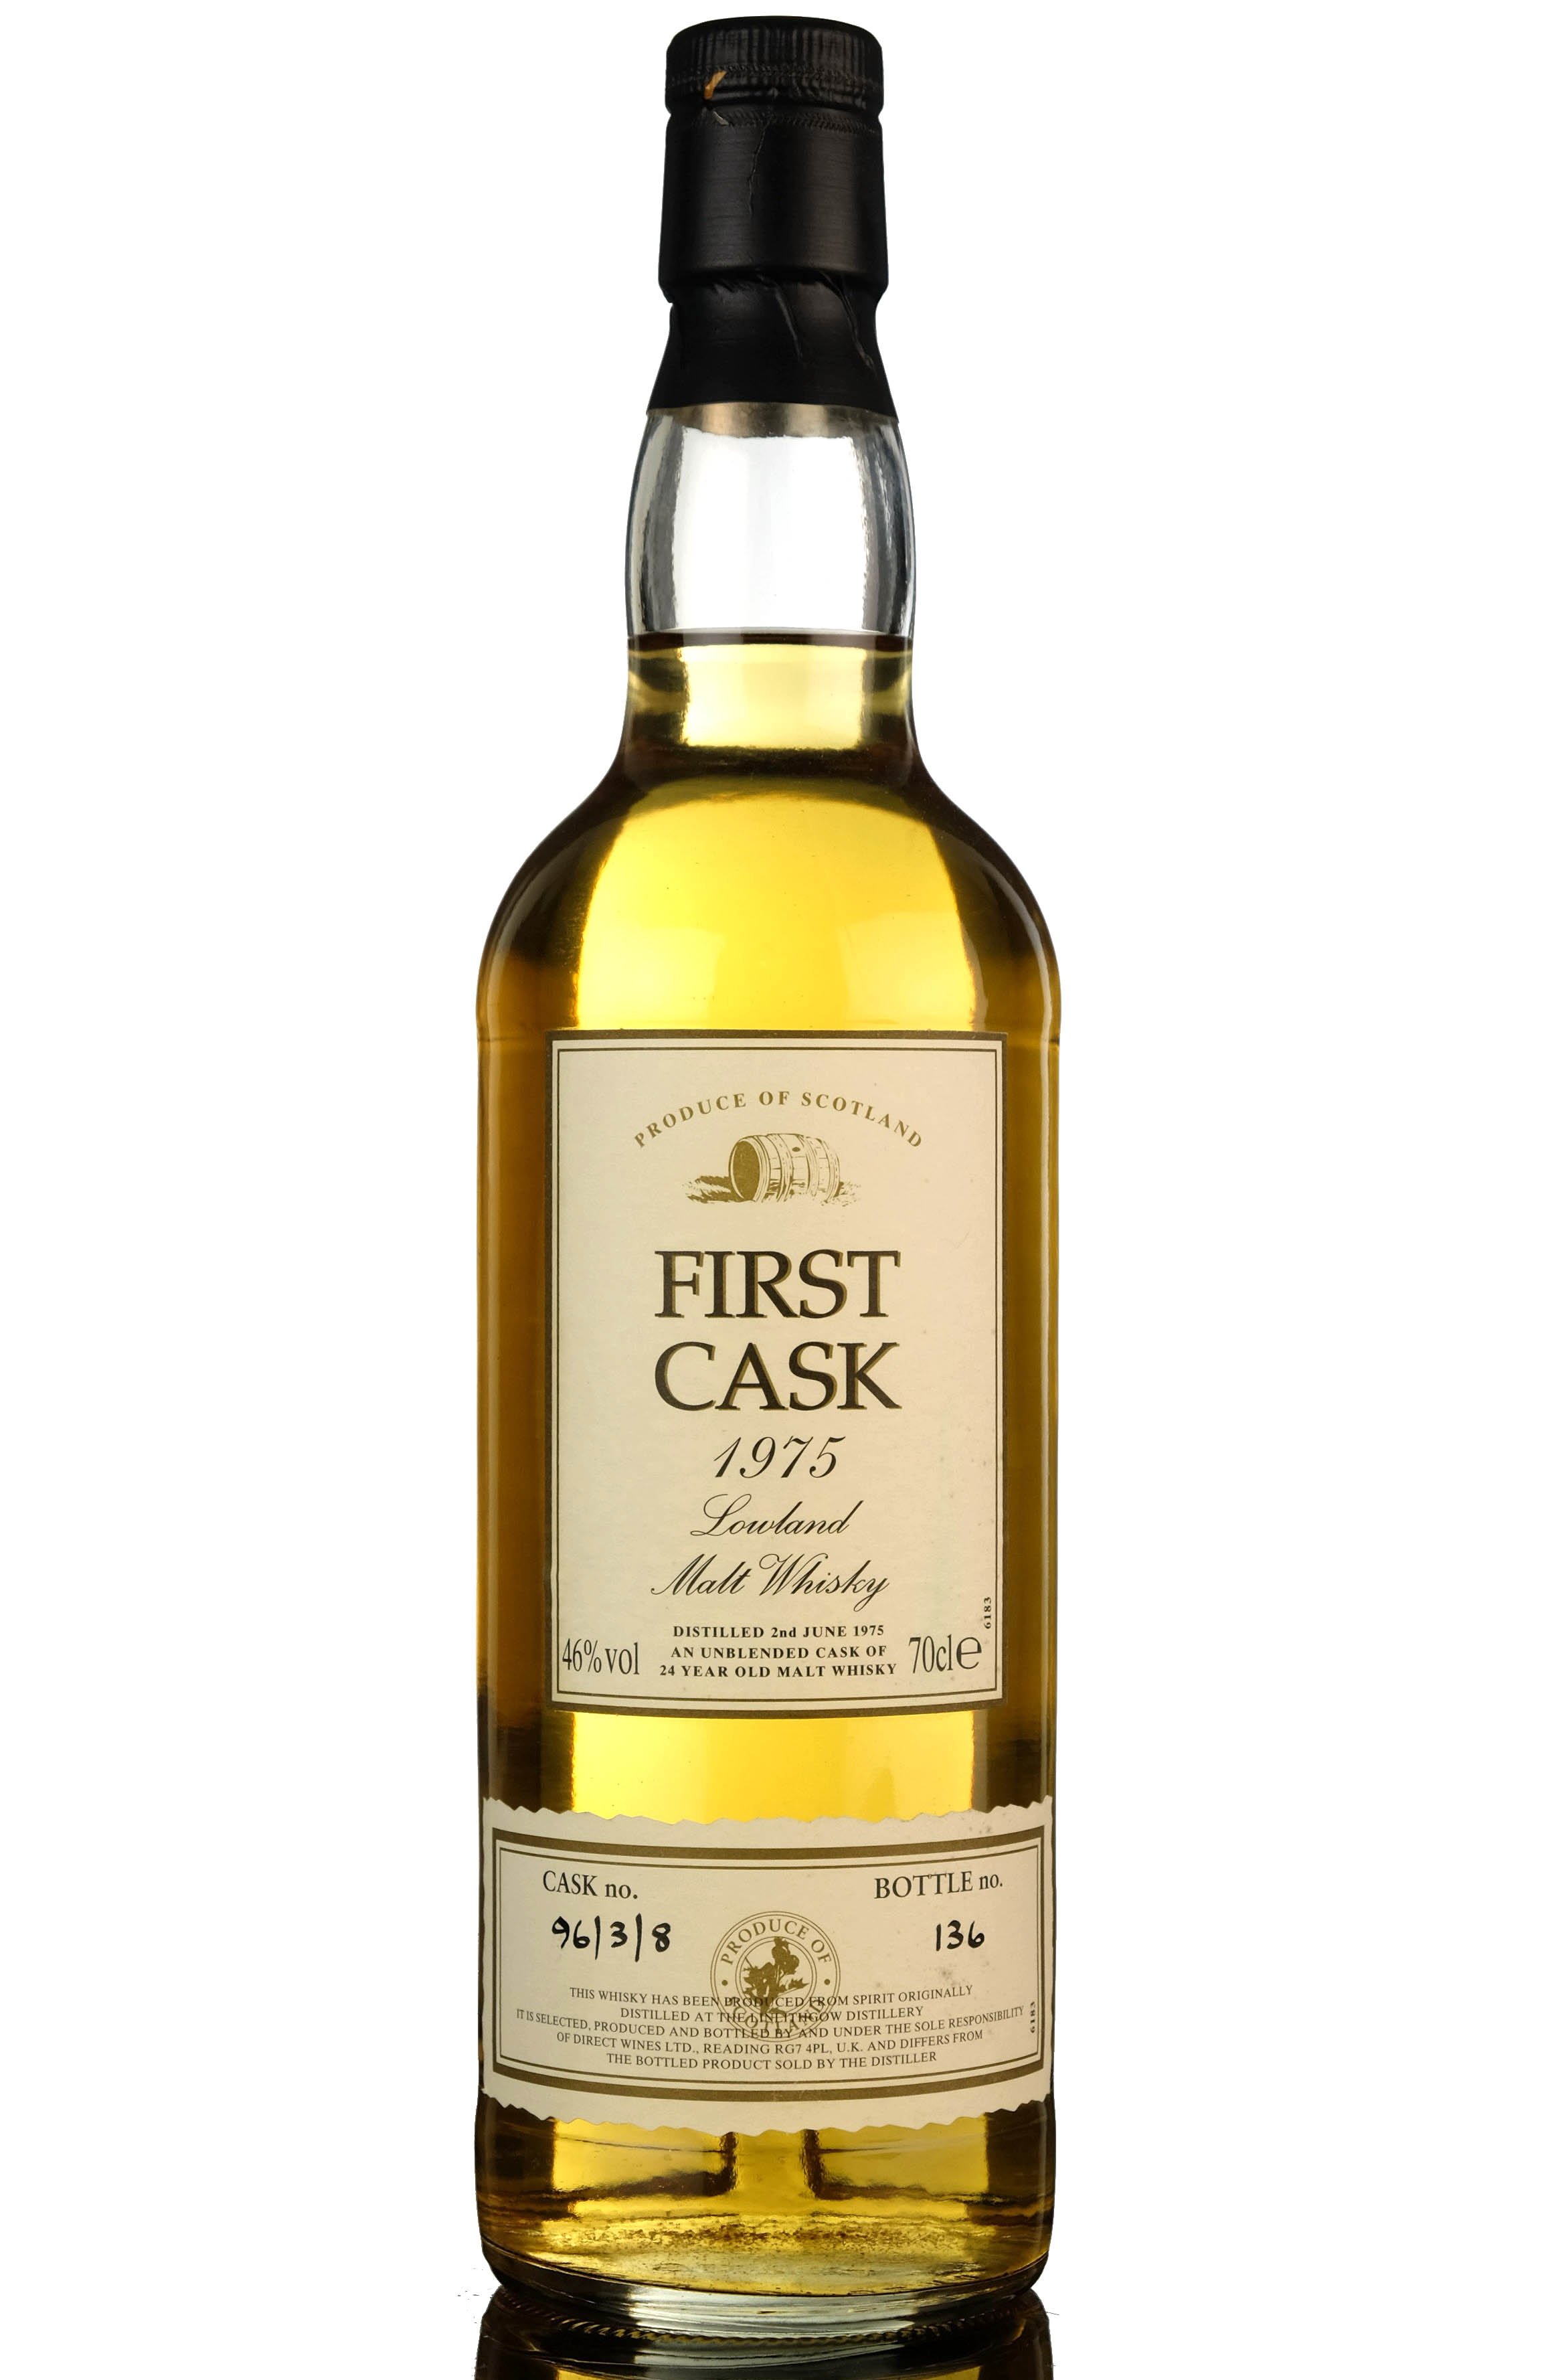 Linlithgow 1975 - 24 Year Old - First Cask 96/3/8